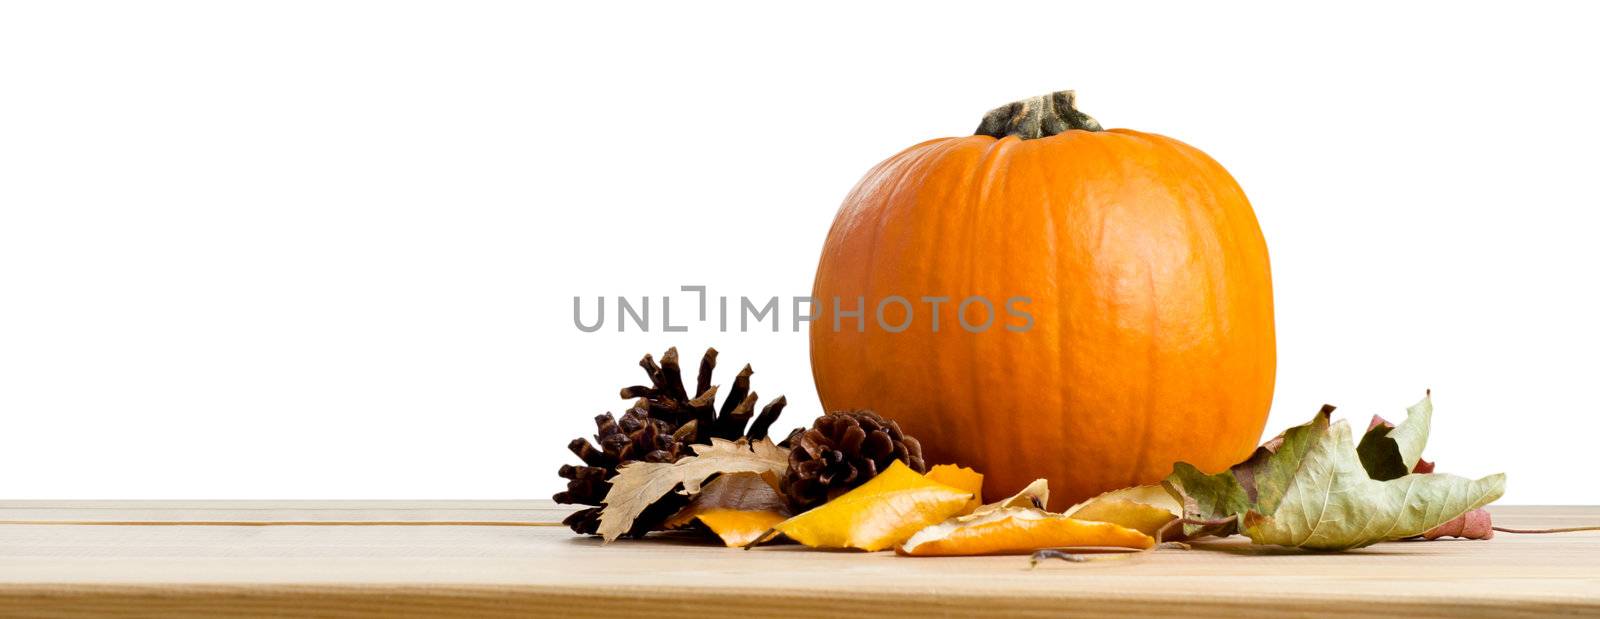 A banner style still life a pumpkin. Autumn leaves and fir cones on a wooden table, isolated against a white background.